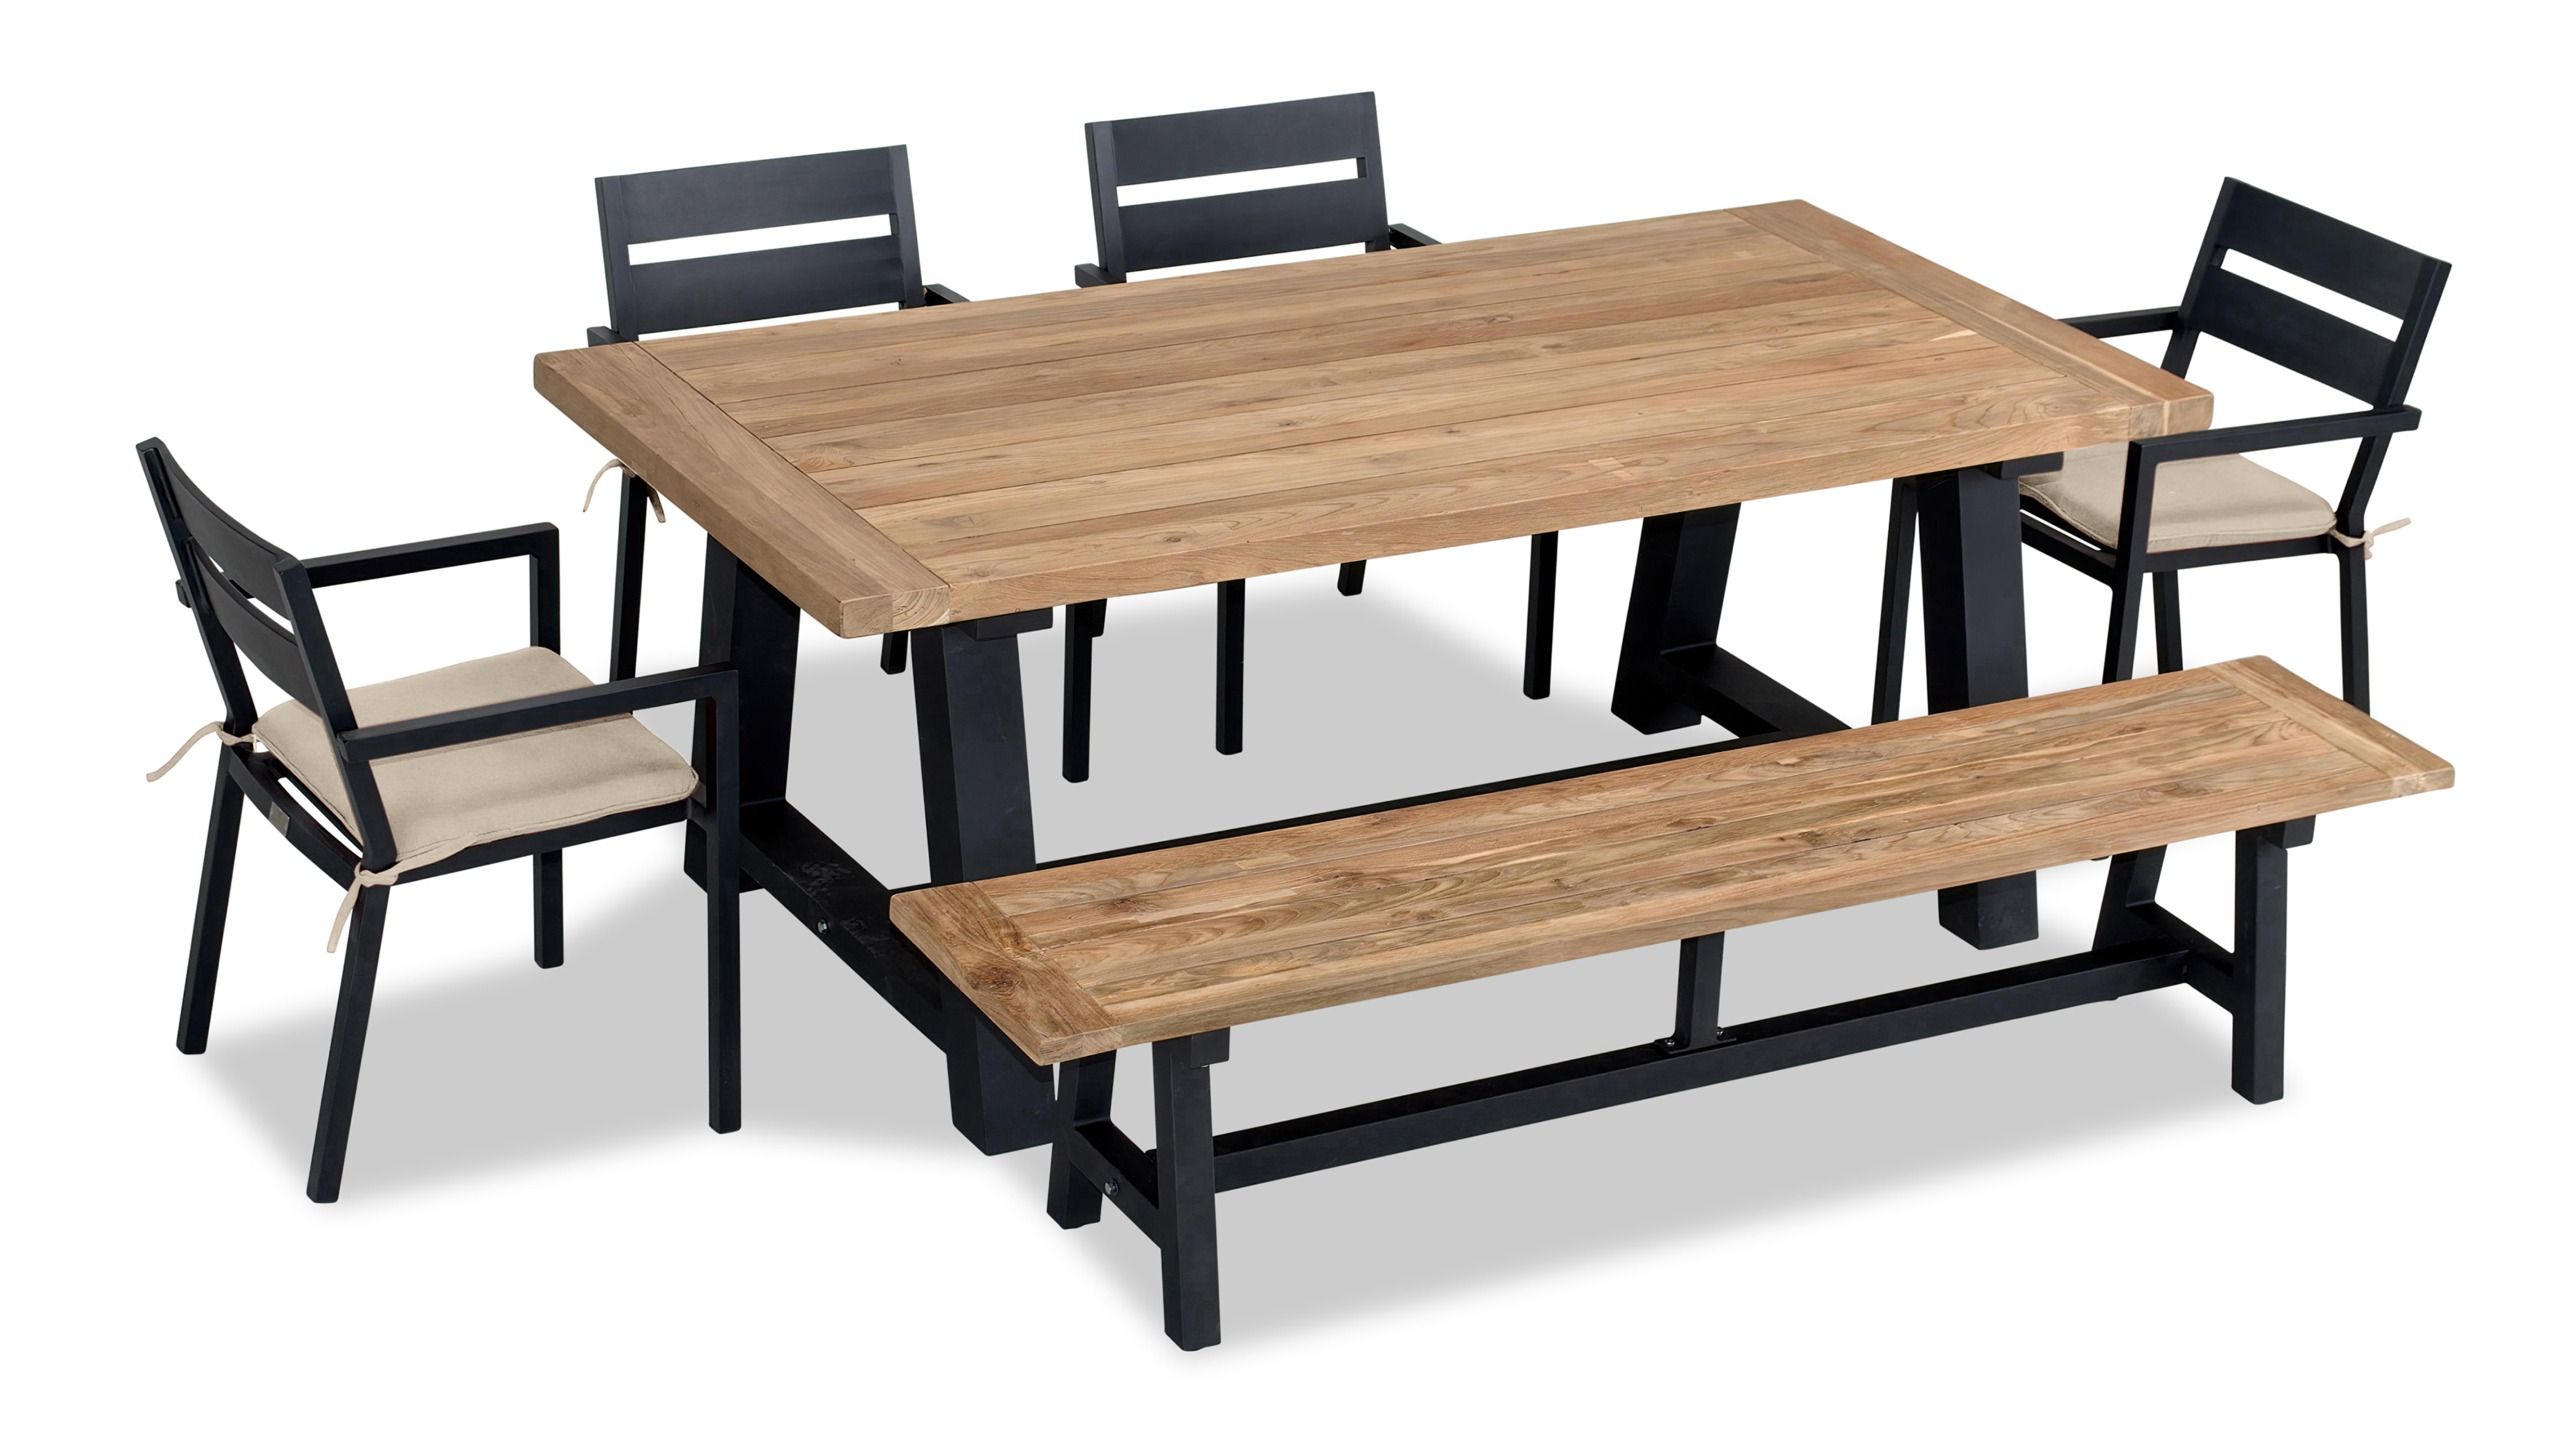 Harmonia Living - Pacifica Mill 6 to 7 Seat Reclaimed Teak Patio Dining Set w/ Bench | PAC-BK-SET551